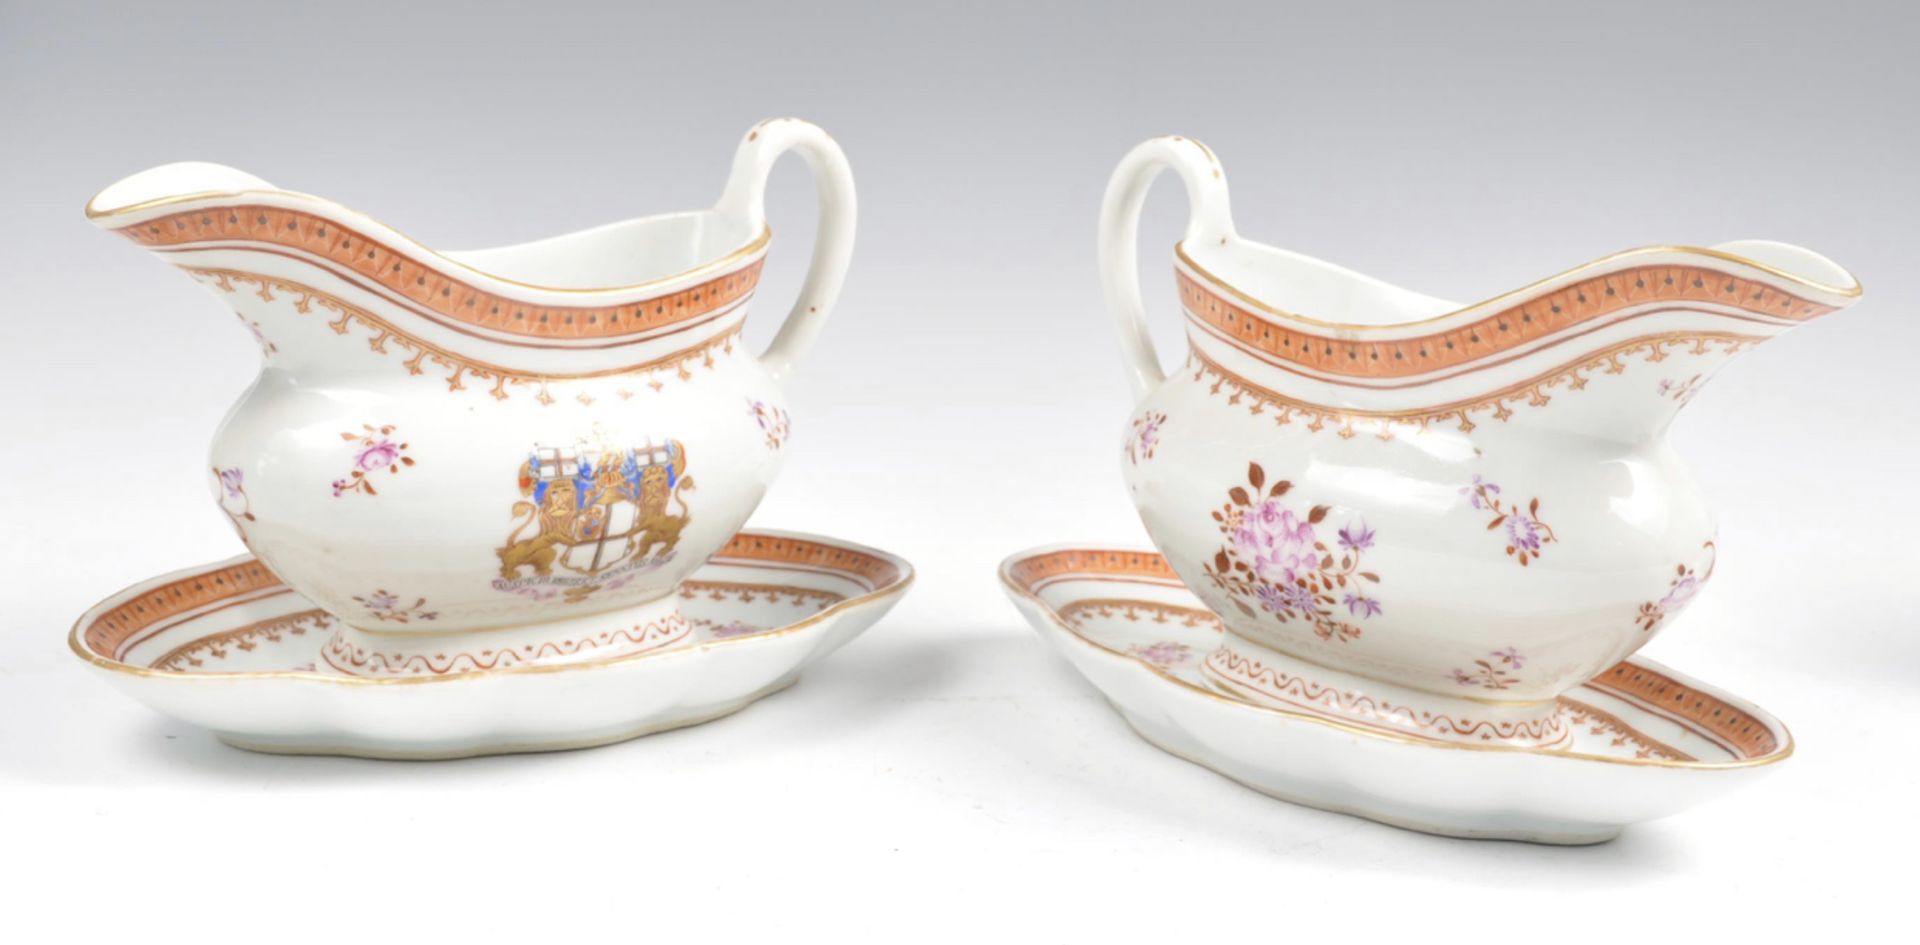 Pair of Samson engraved gravy boats and stands - Image 2 of 5